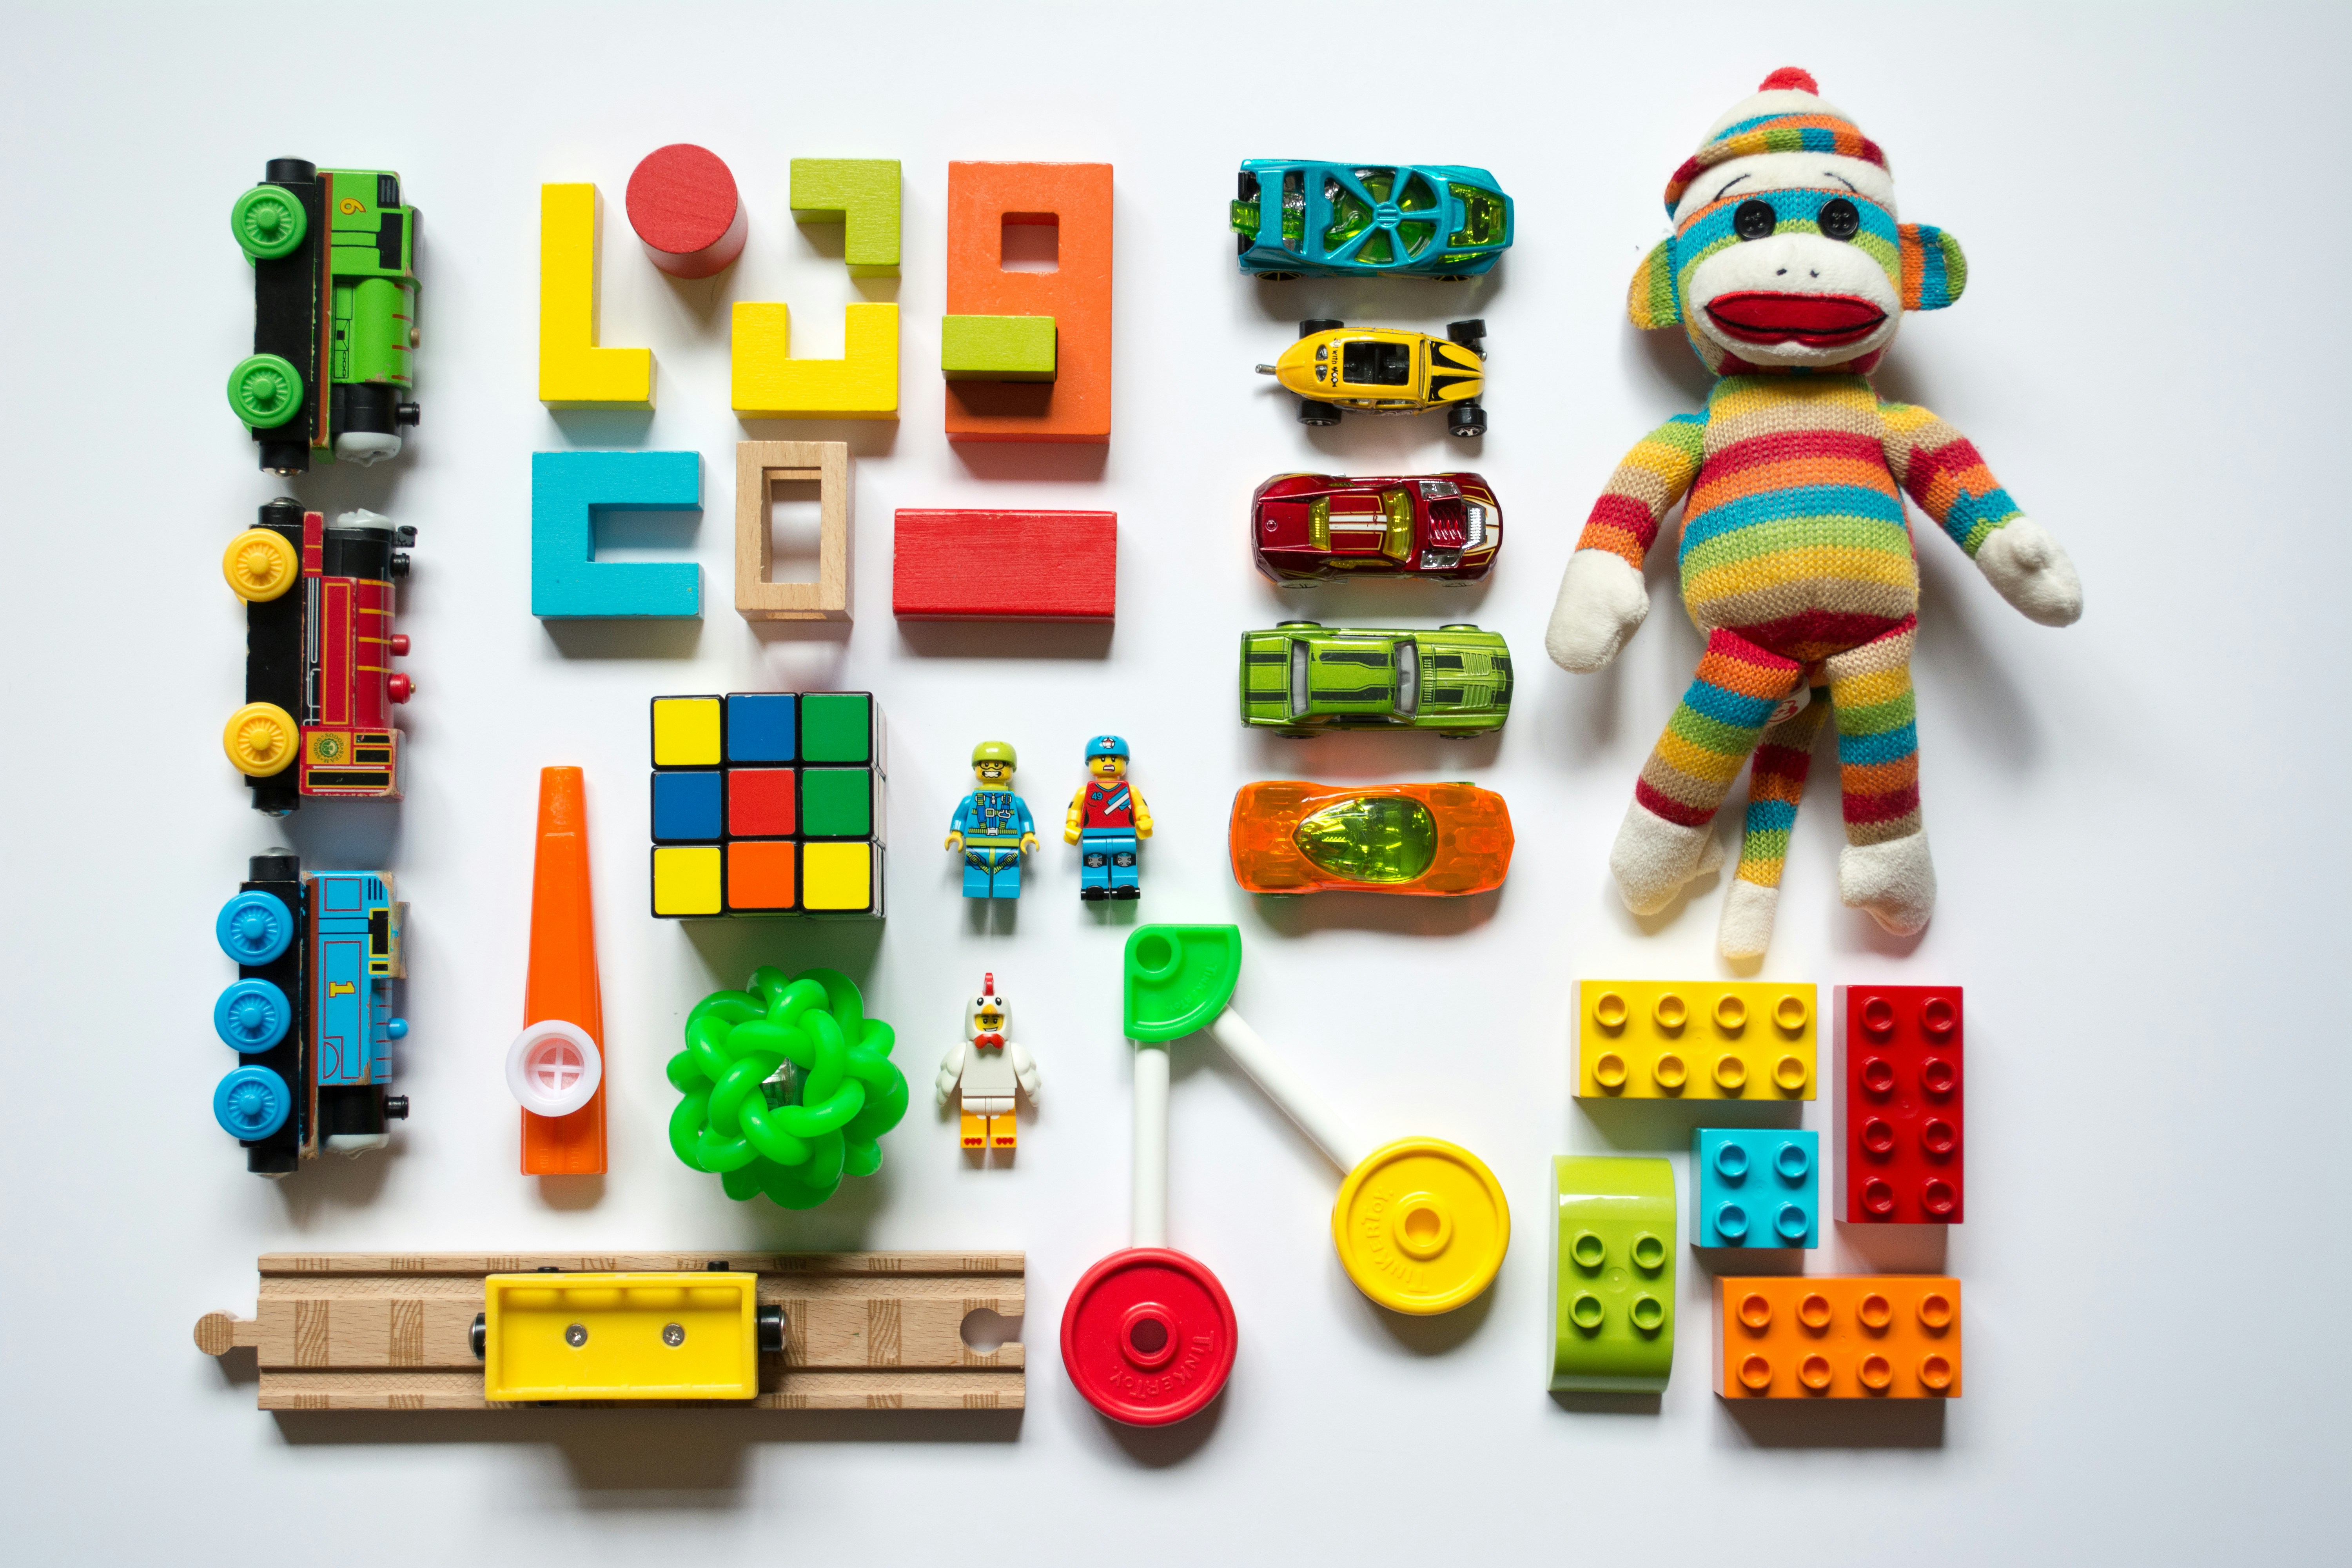 Choose from a curated selection of toys photos. Every picture of toys are always free on Unsplash.